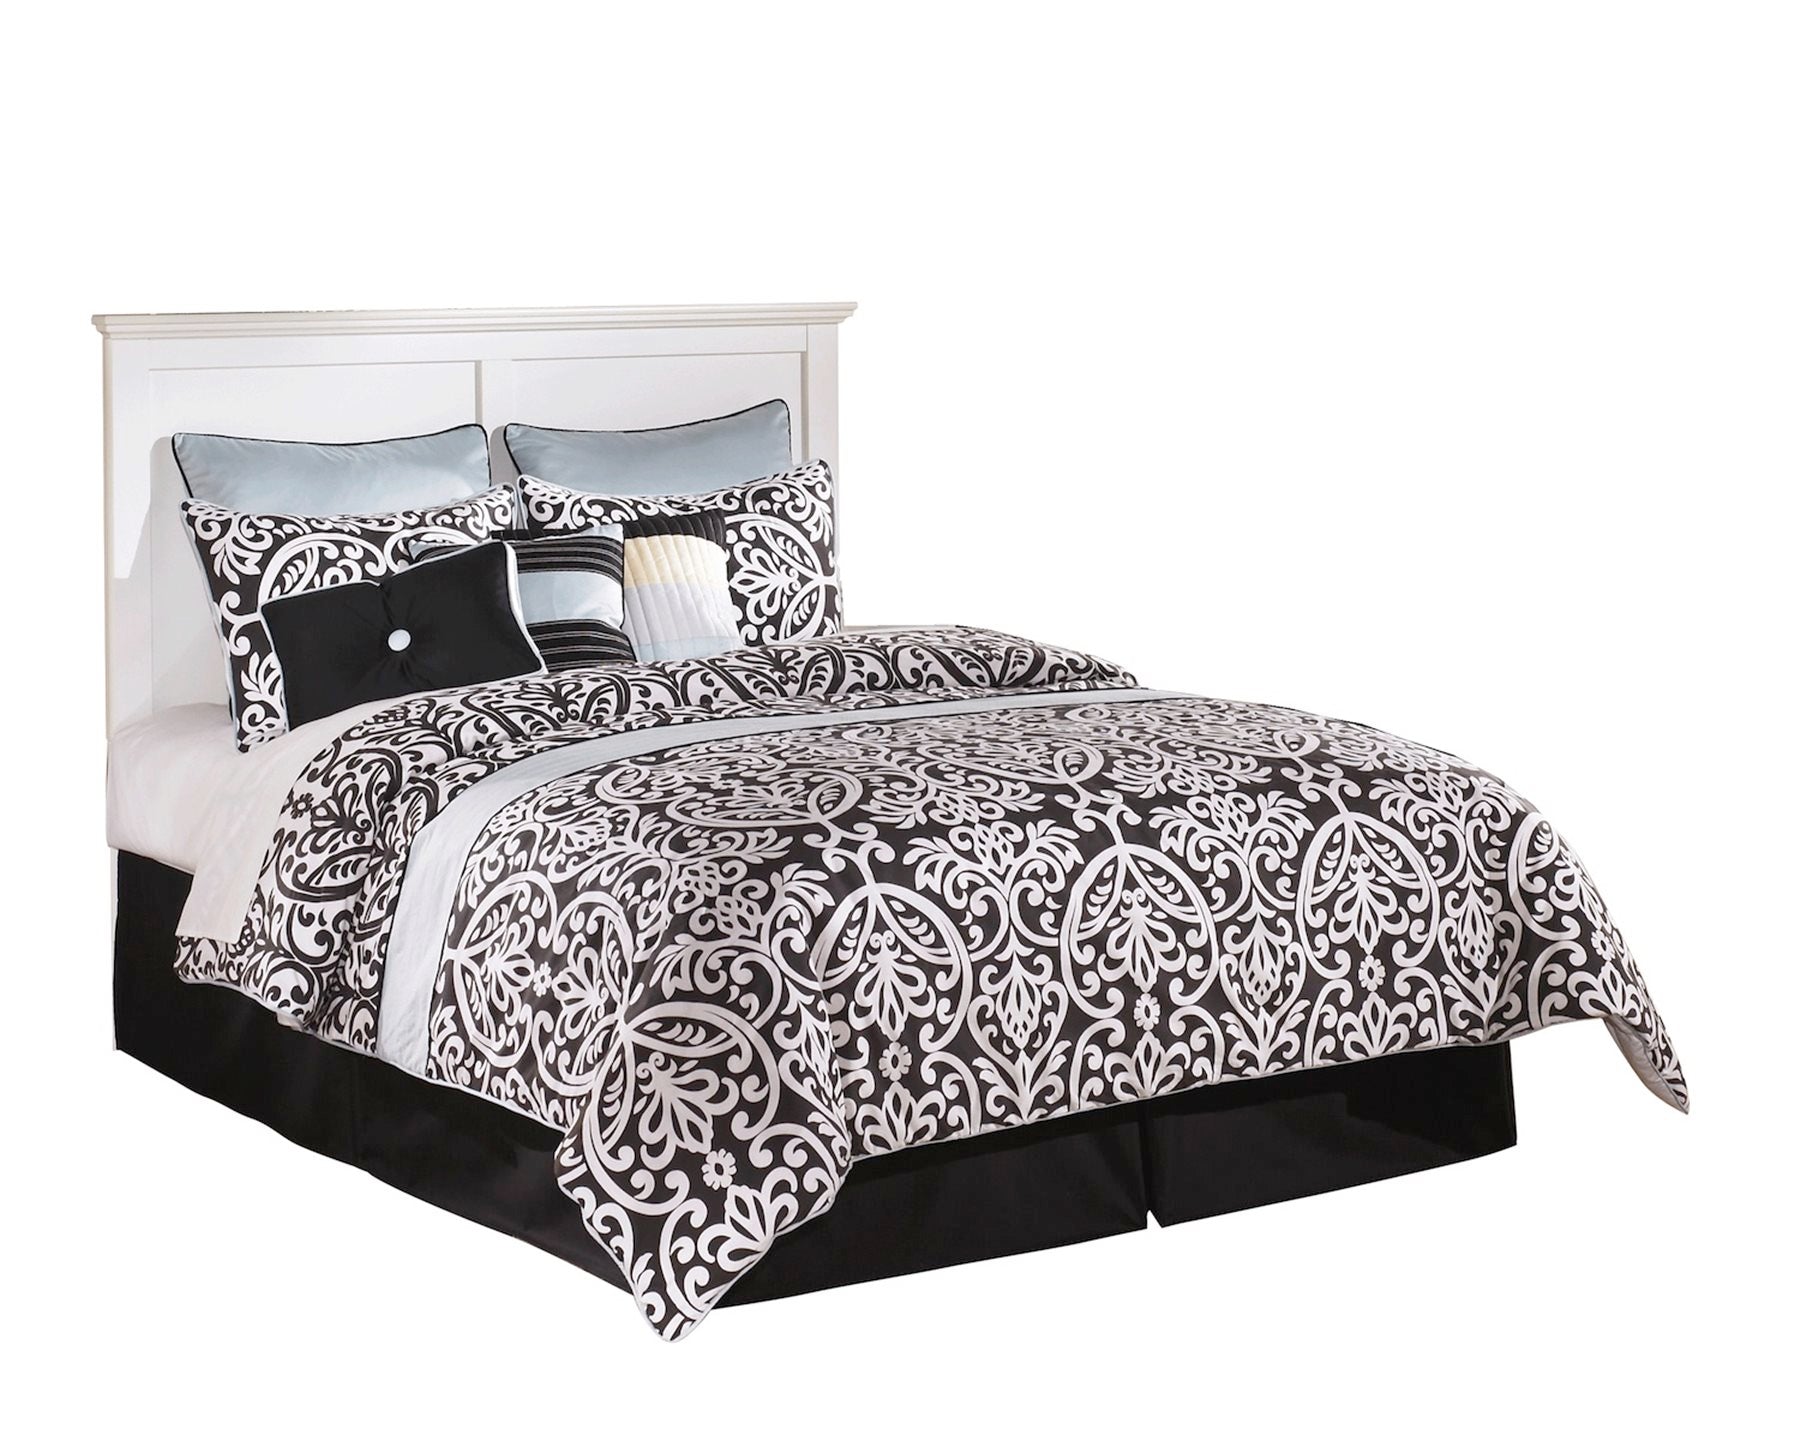 Ashley Bostwick Shoals 4 PC E King Panel Headboard Bedroom Set in White - The Furniture Space.